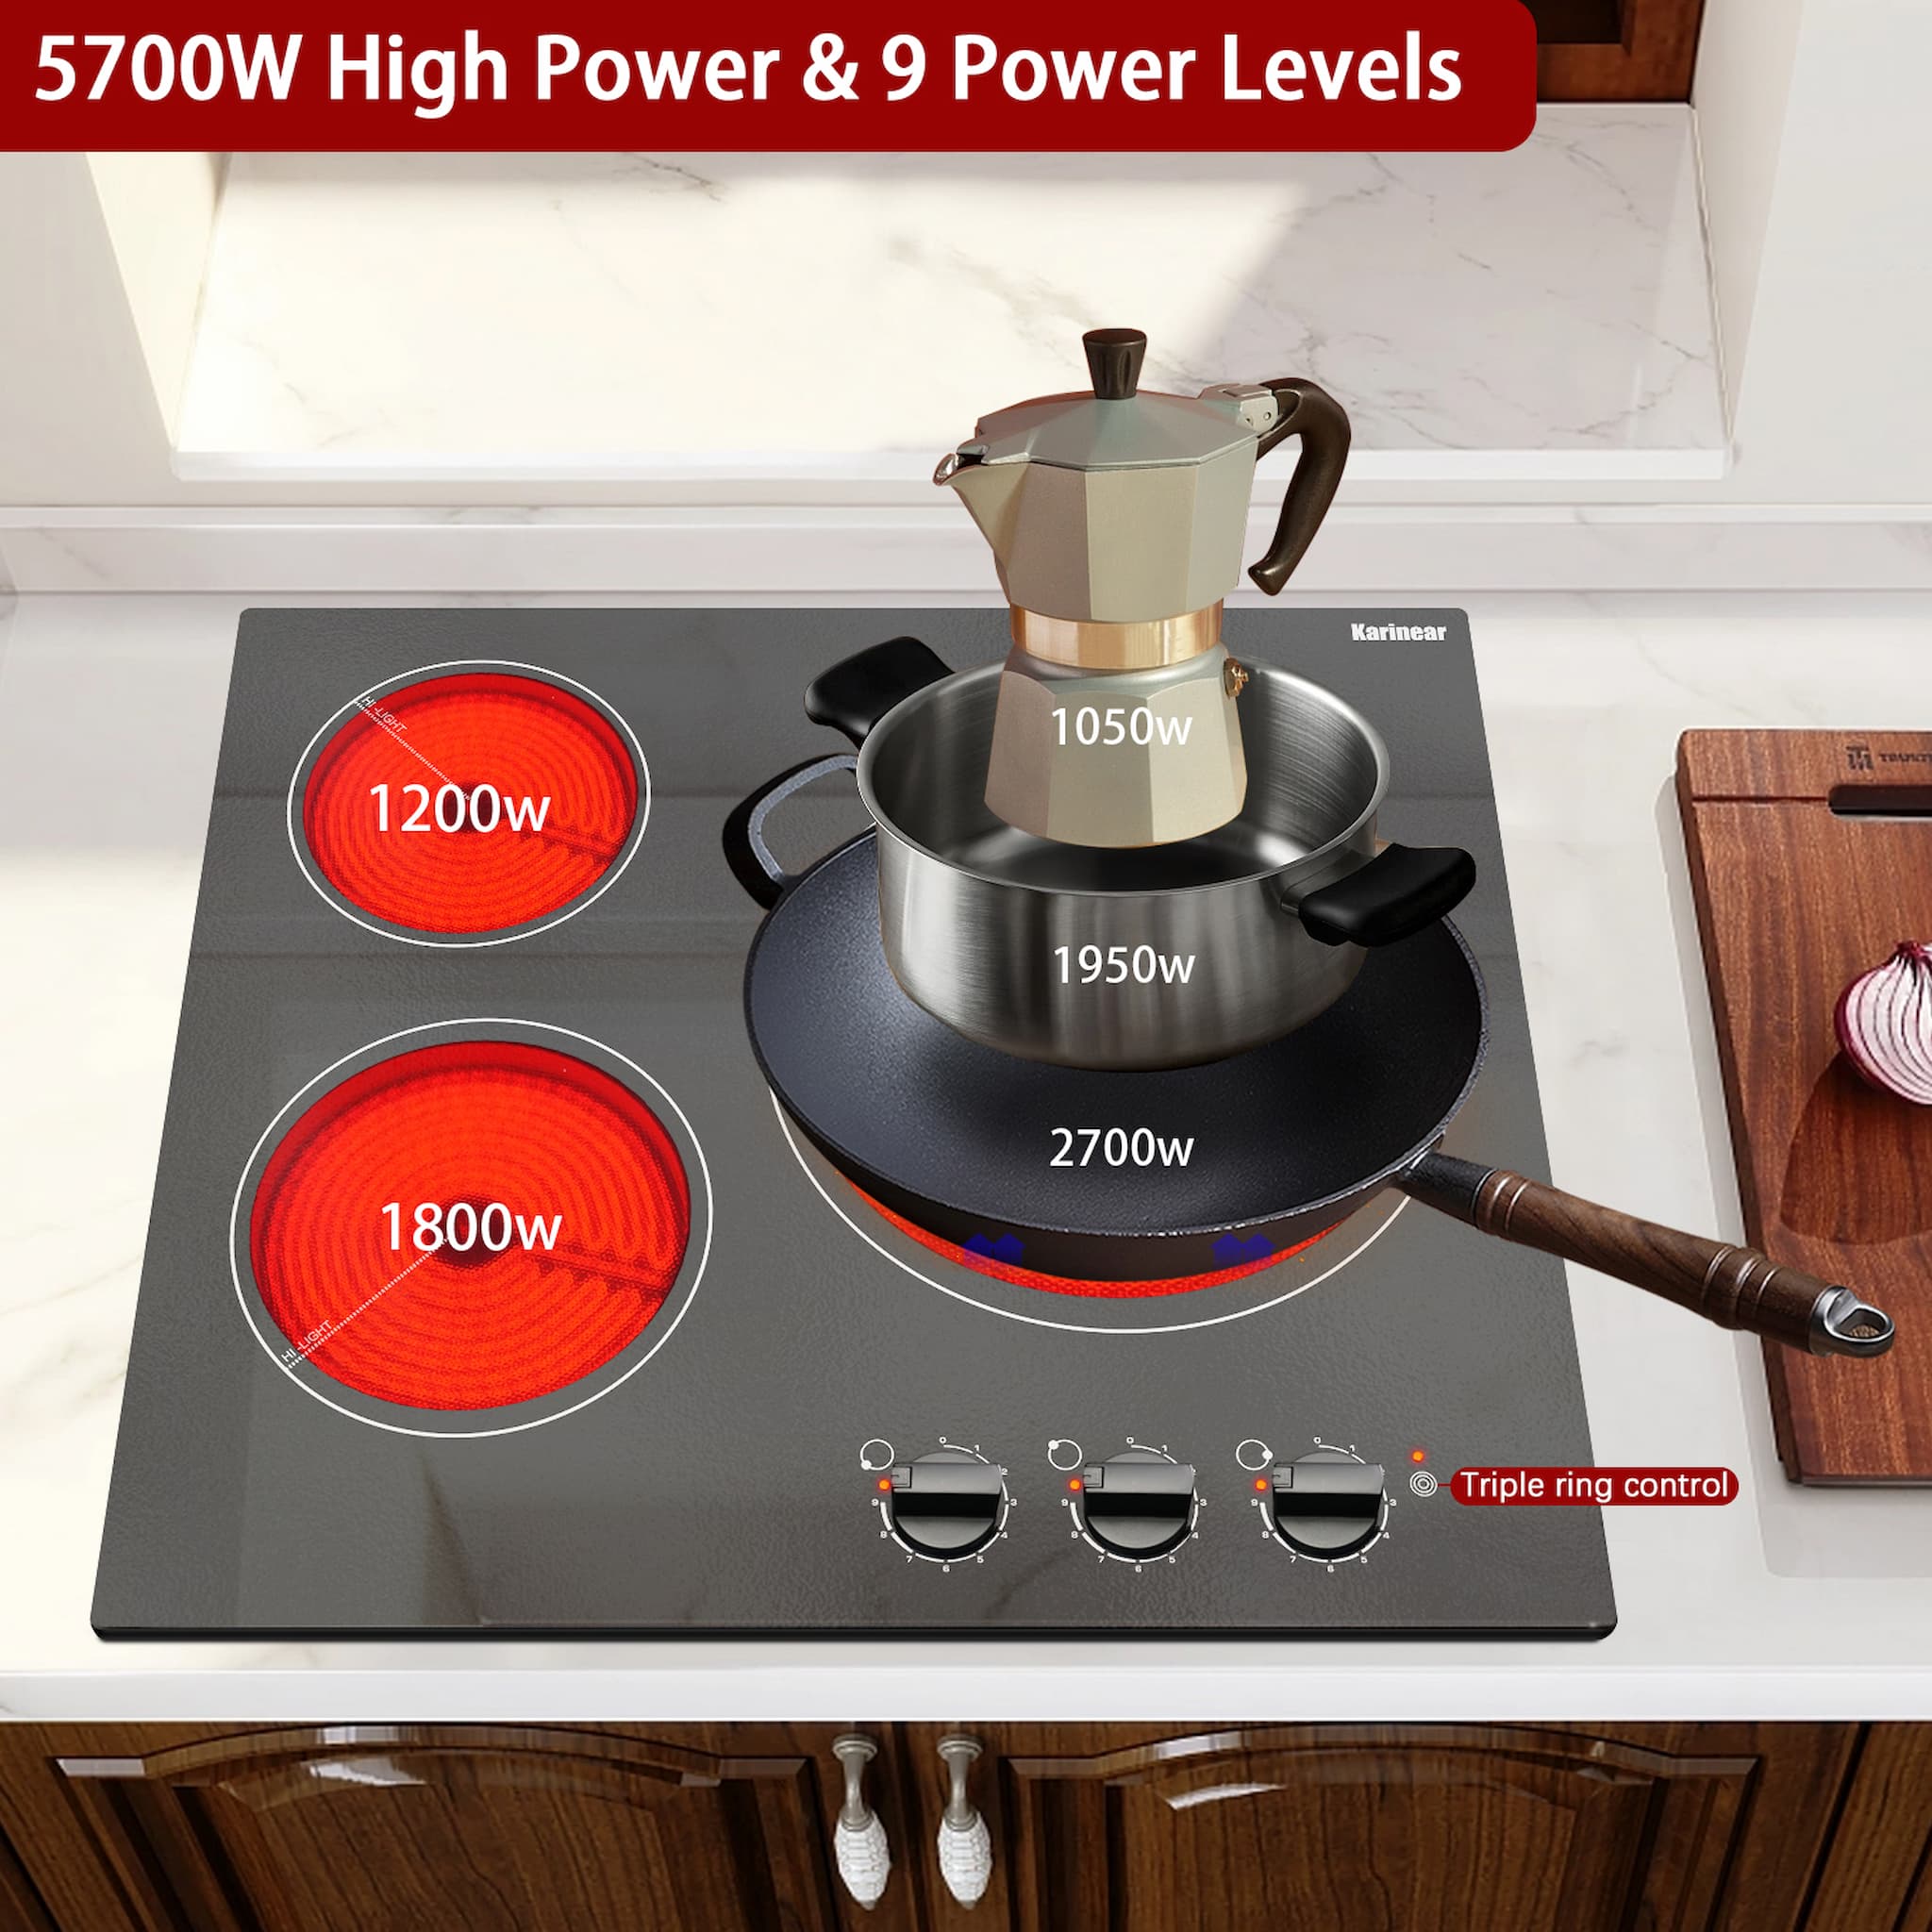  Eelectric Cooktop 24 inch, ECOTOUCH 3 Burner Radiant Electric  Cooktop Built-in, 24 Stove Top Knob Control, Timer&Child Safety Lcok,  5700W, 220-240V for Hard Wire(No Plug) : Appliances